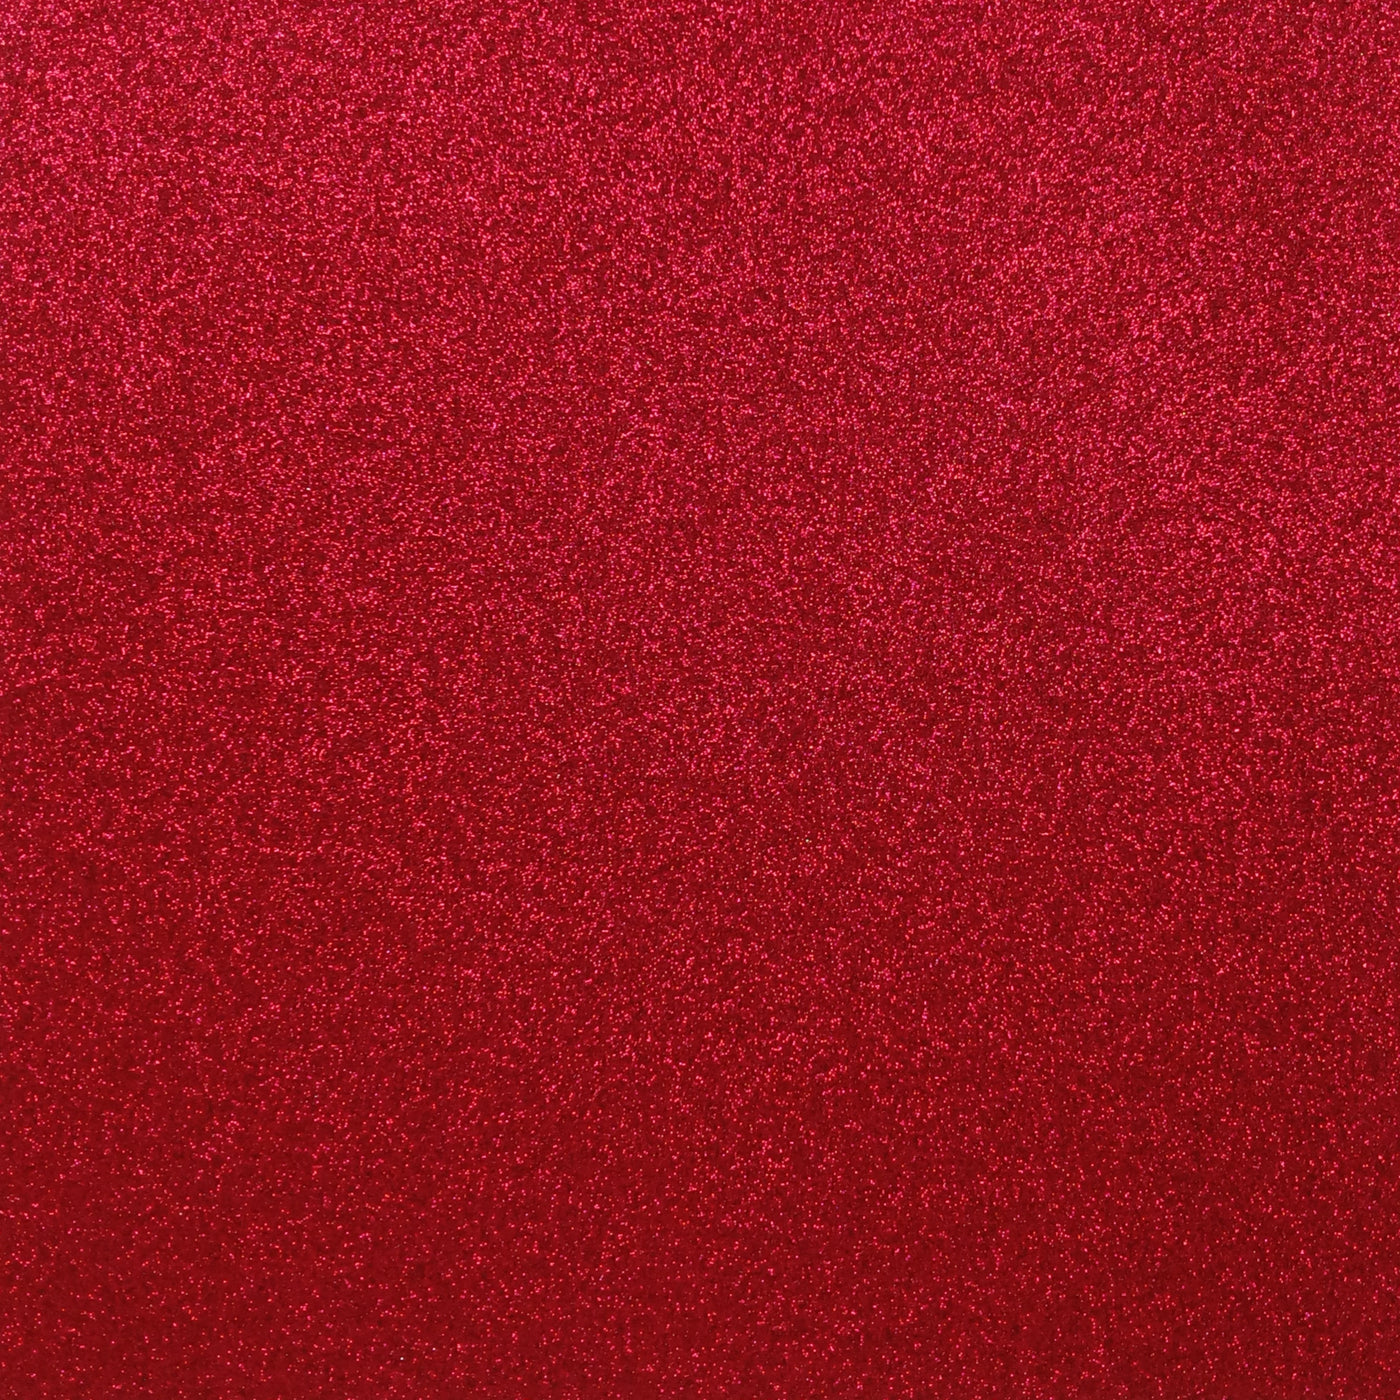 RUBY RED Glitter Luxe Cardstock - Encore Paper – The 12x12 Cardstock Shop